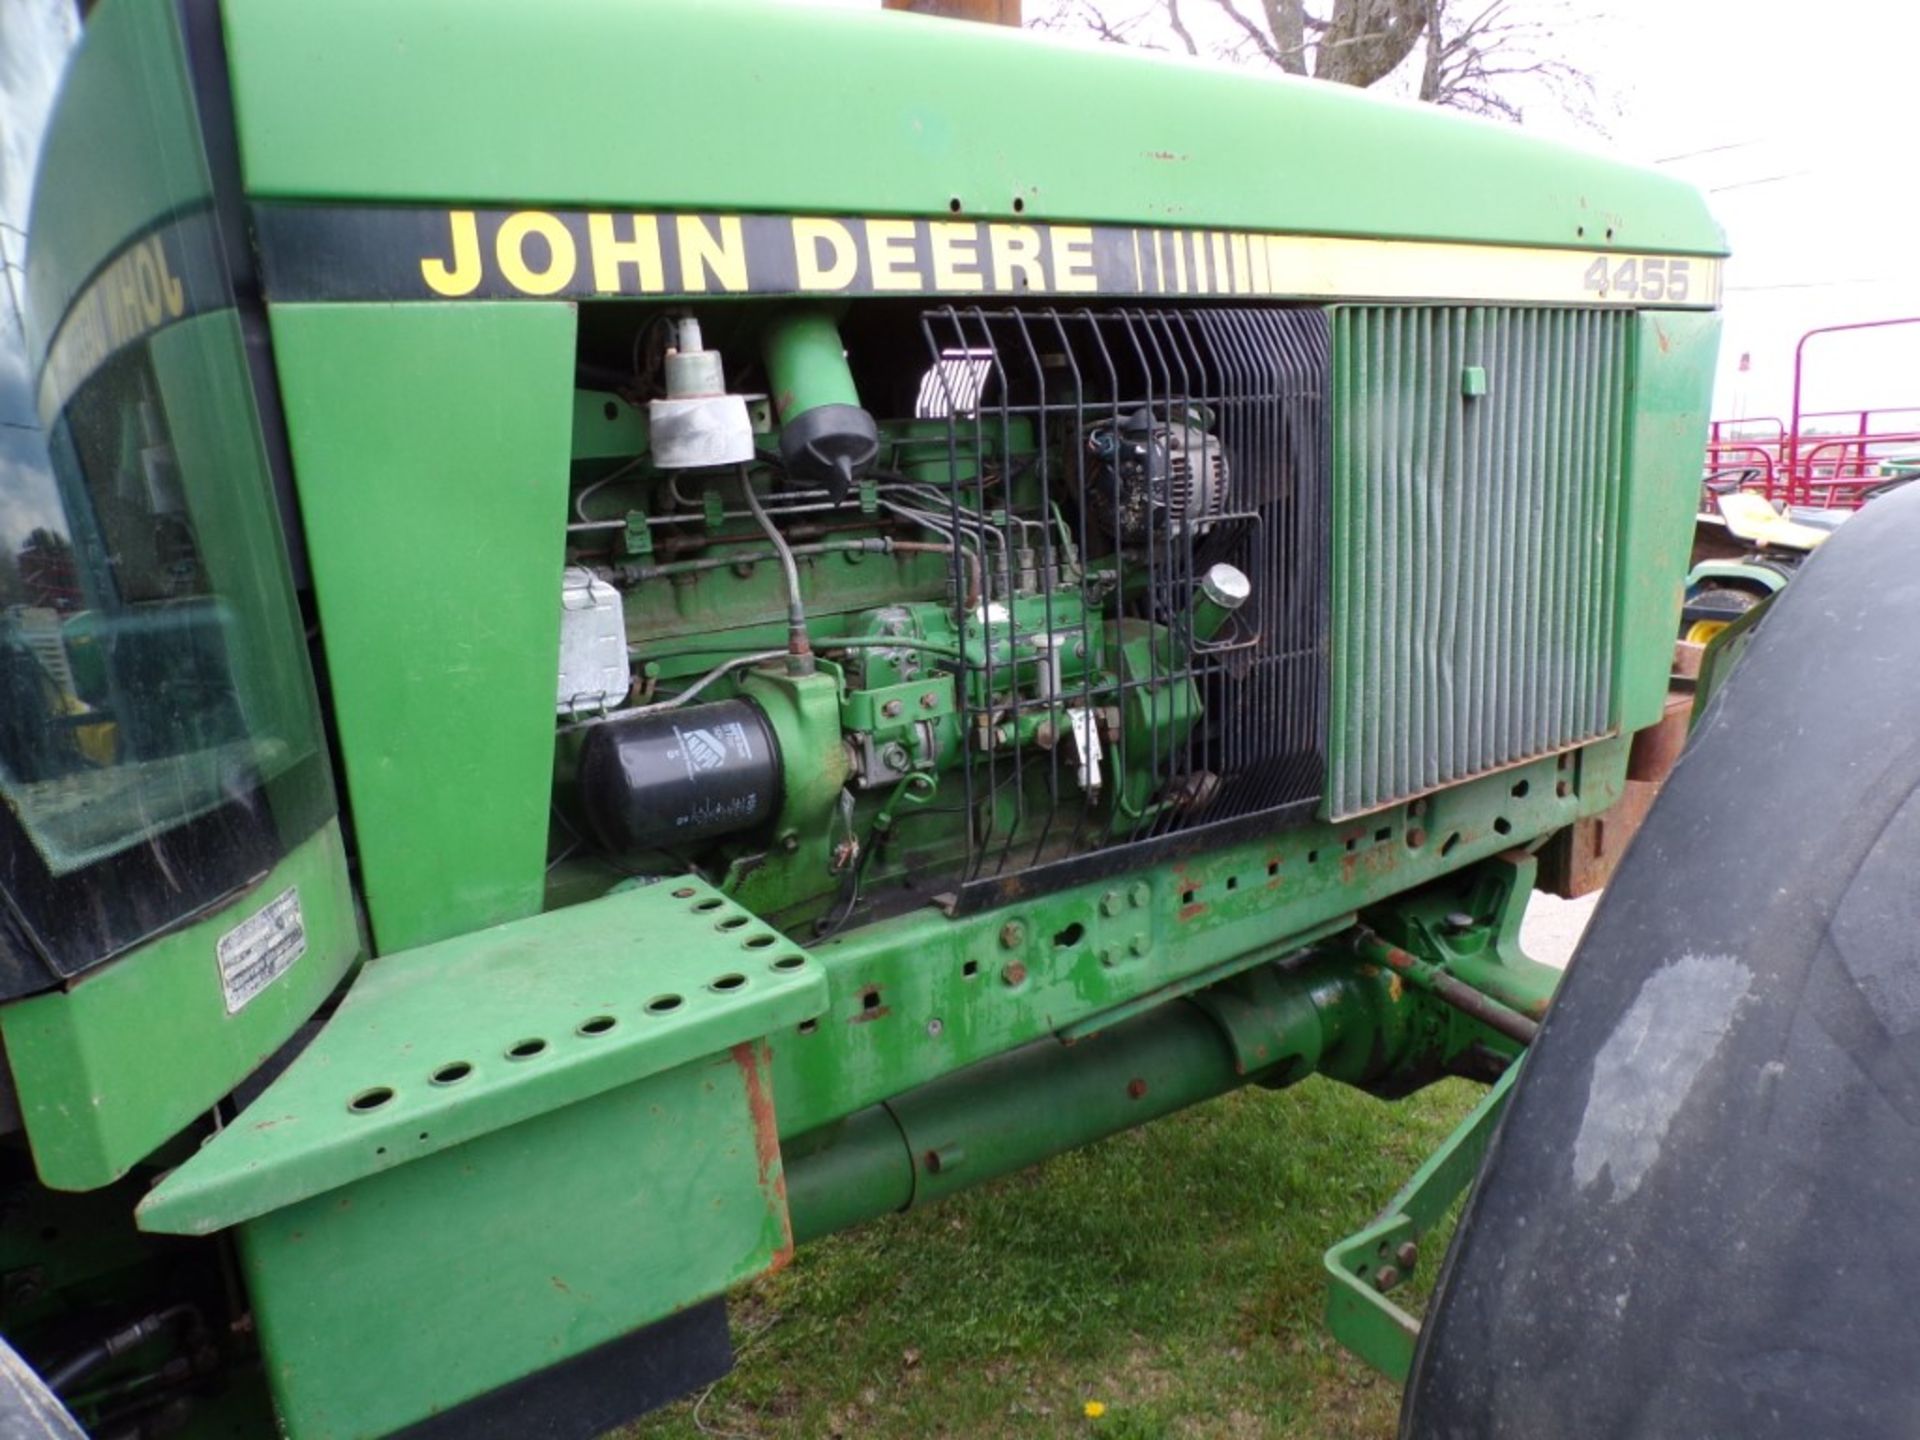 John Deere 4455 4WD Tractor with Power Shift Trans., (3) Rear Hydraulc Remotes, 650-58-38 Rear - Image 6 of 7